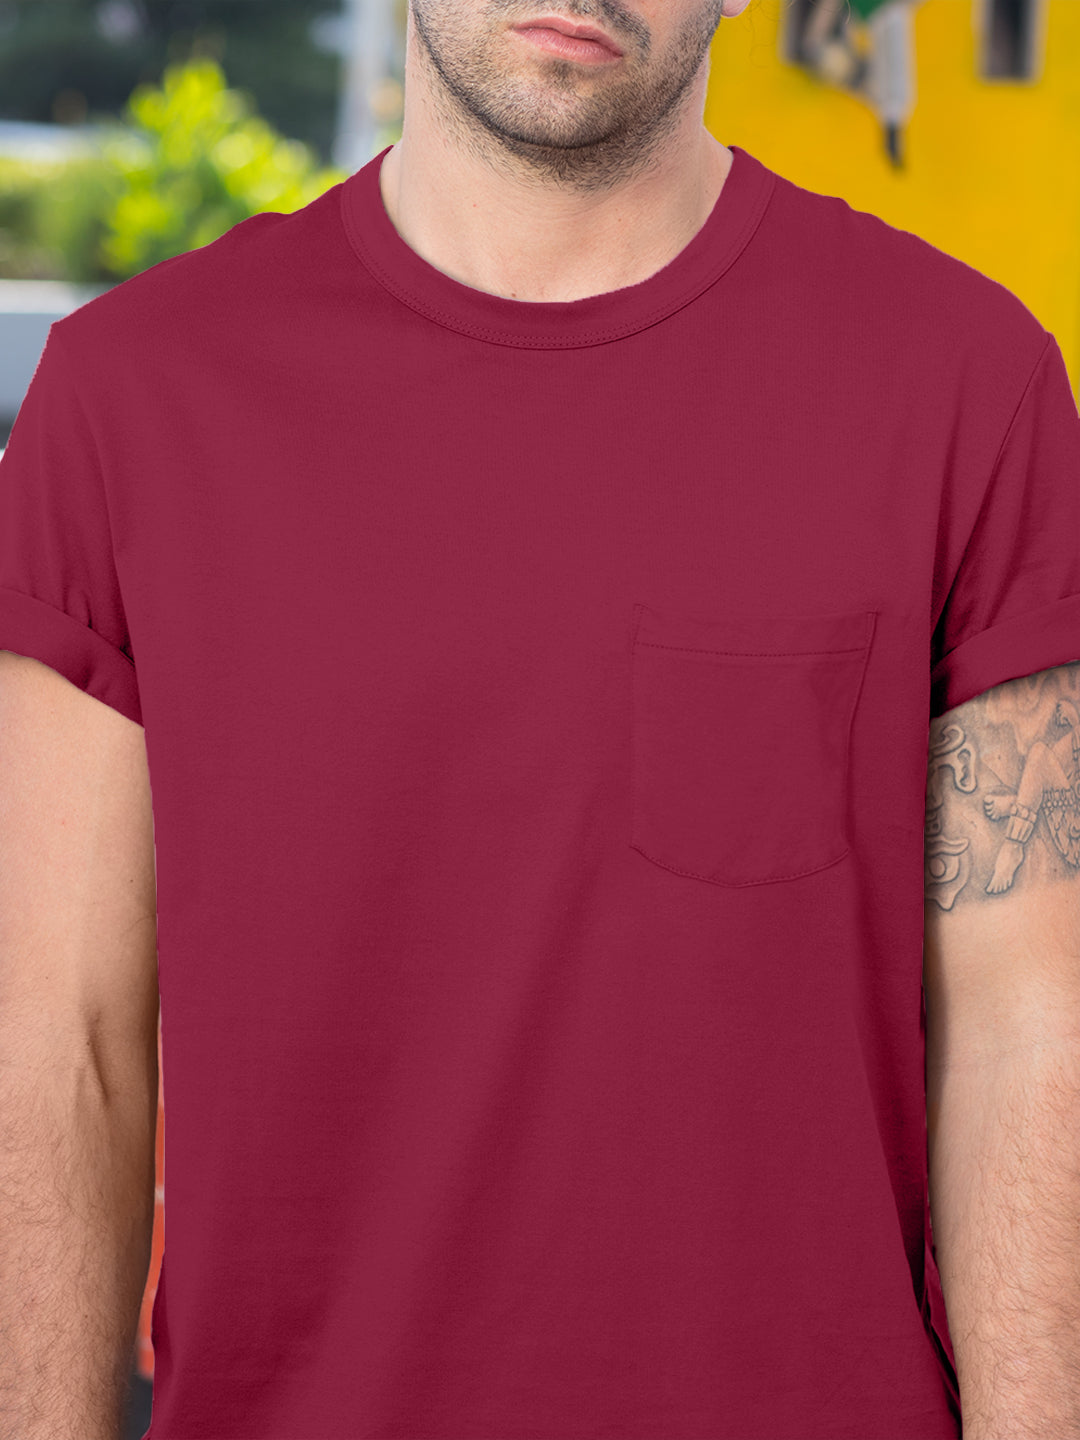 Comfortable Pure Cotton T-Shirt : Wine Red